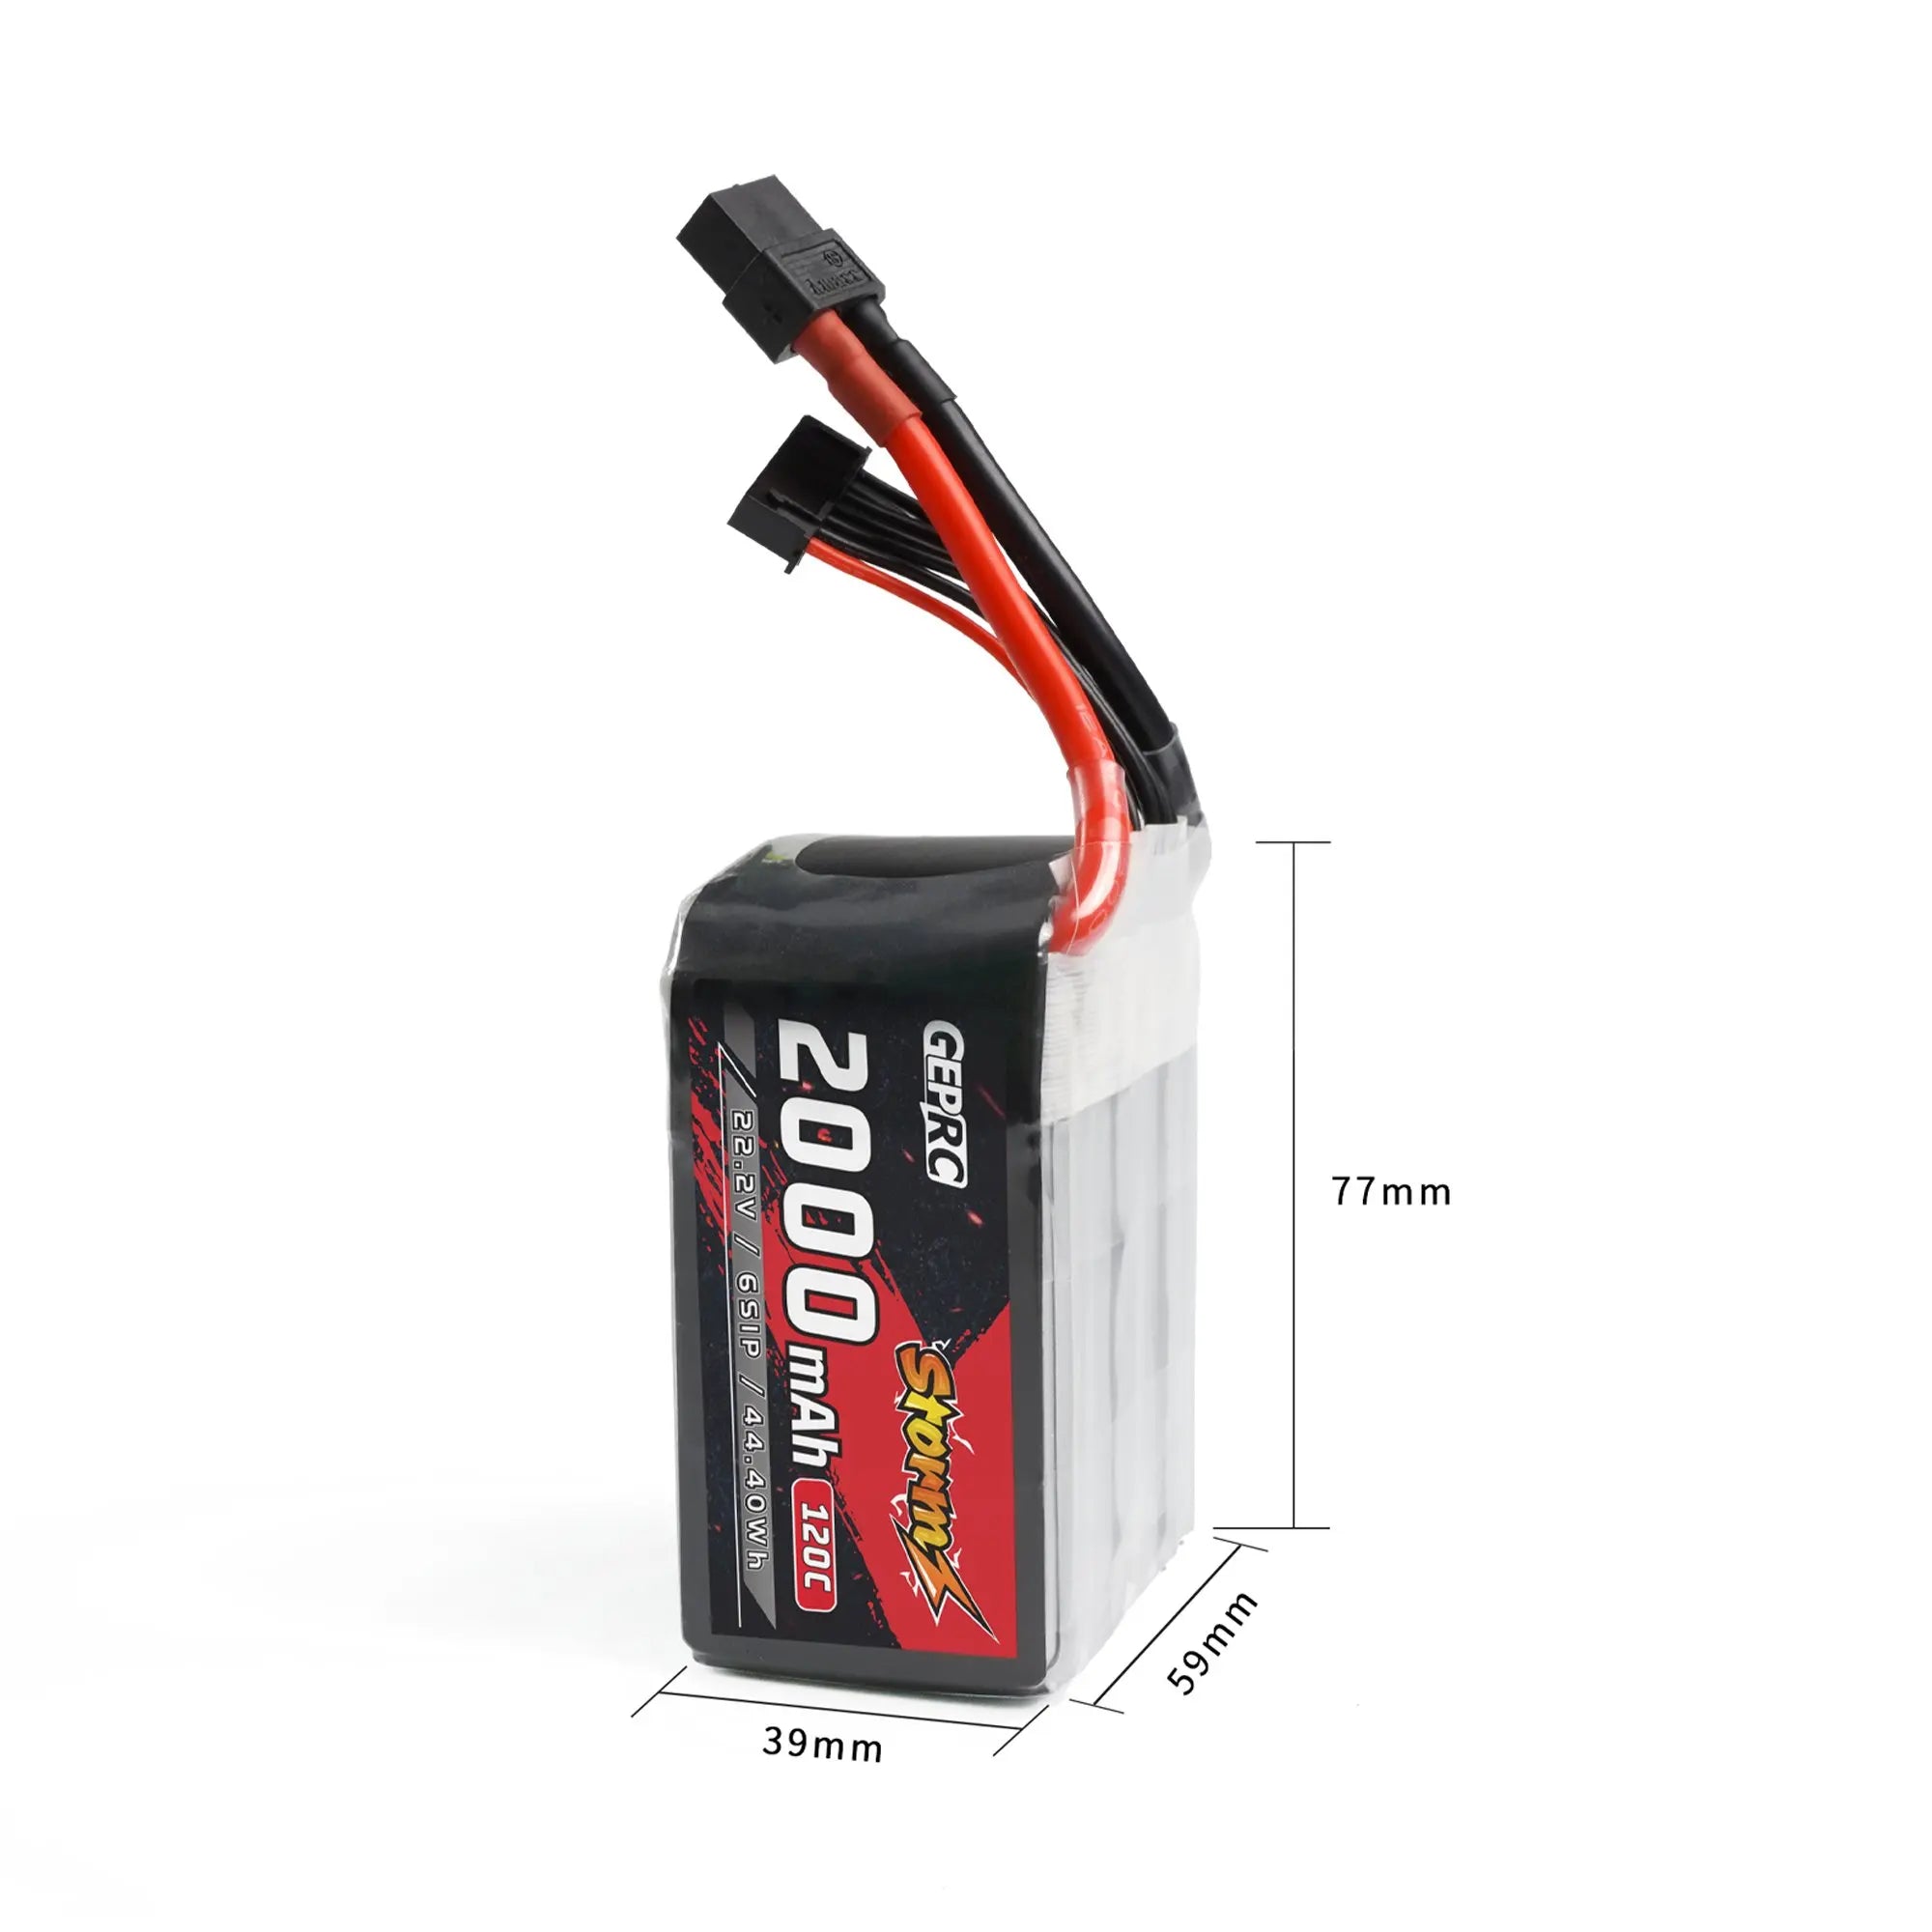 GEPRC Storm 6S 2000mAh 120C Lipo Battery, the full charge voltage of single cell of LiPo battery is not more than 4.2V